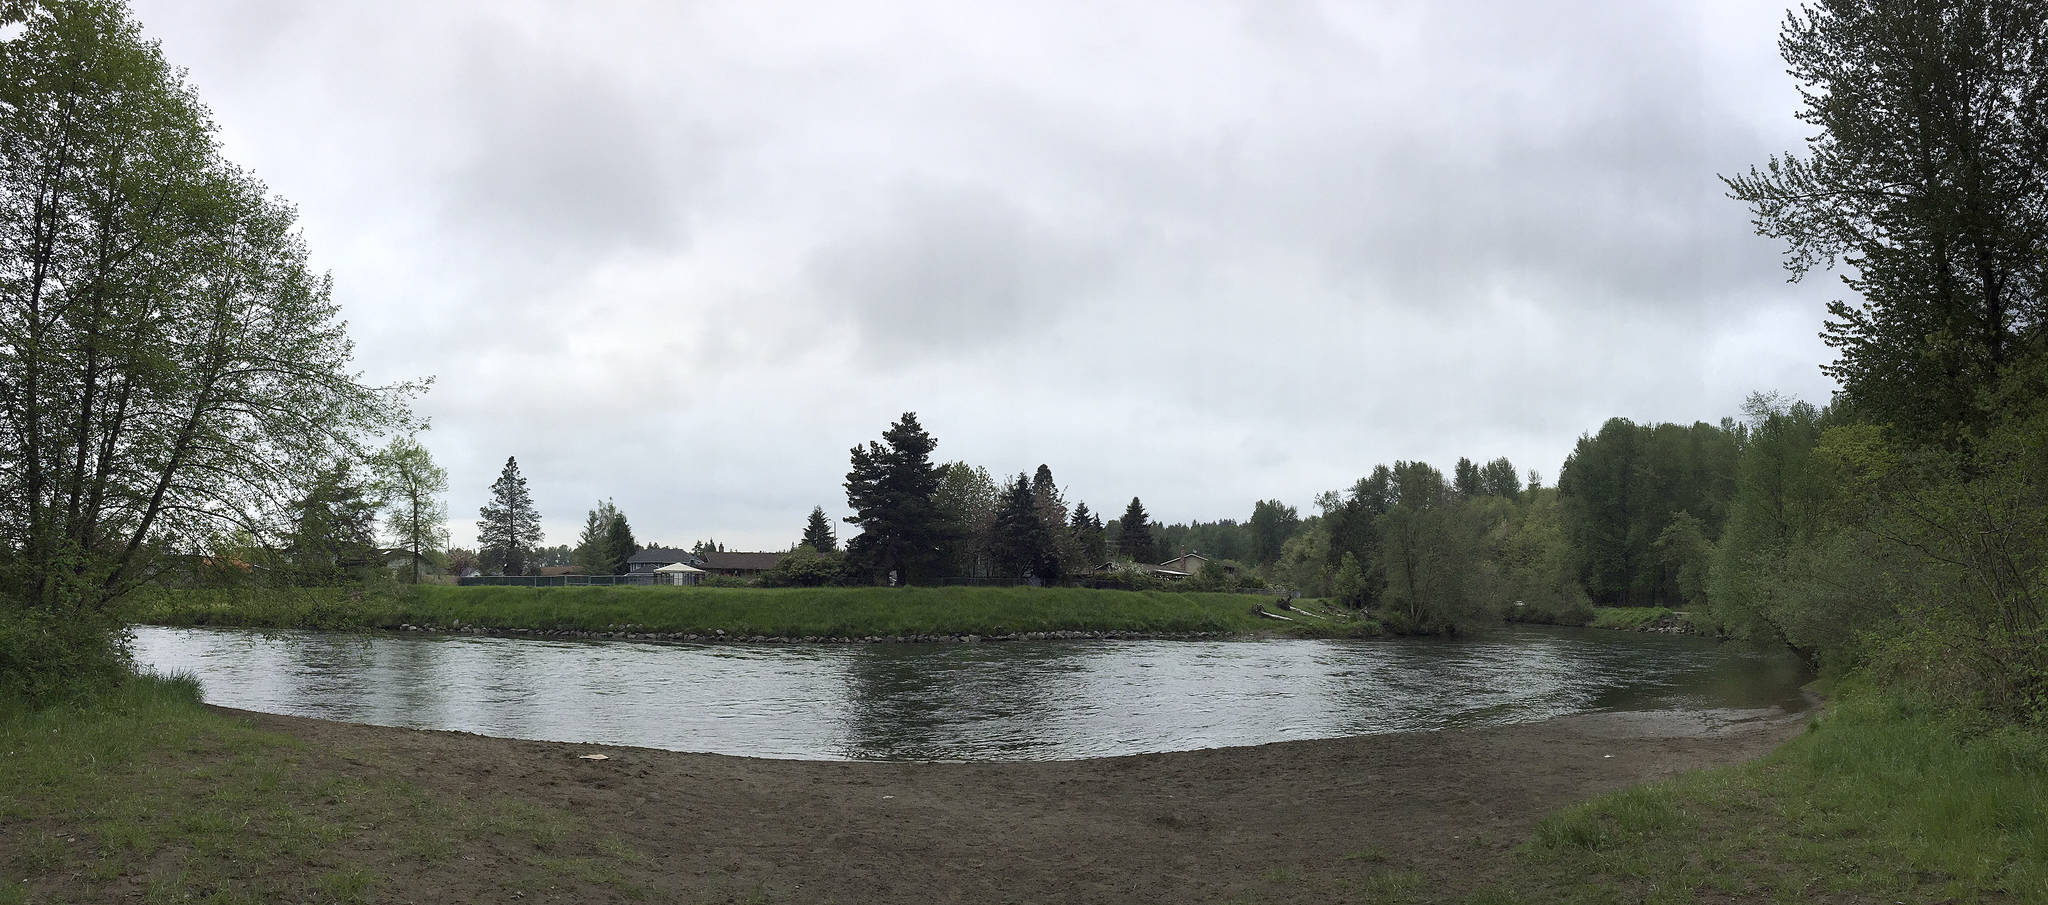 The city of Auburn plans to build a community park at 104th Avenue Southeast along the Green River to expand and create safe public access to the river for water-based recreation activities. COURTESY PHOTO, Washington State Recreation and Conservation